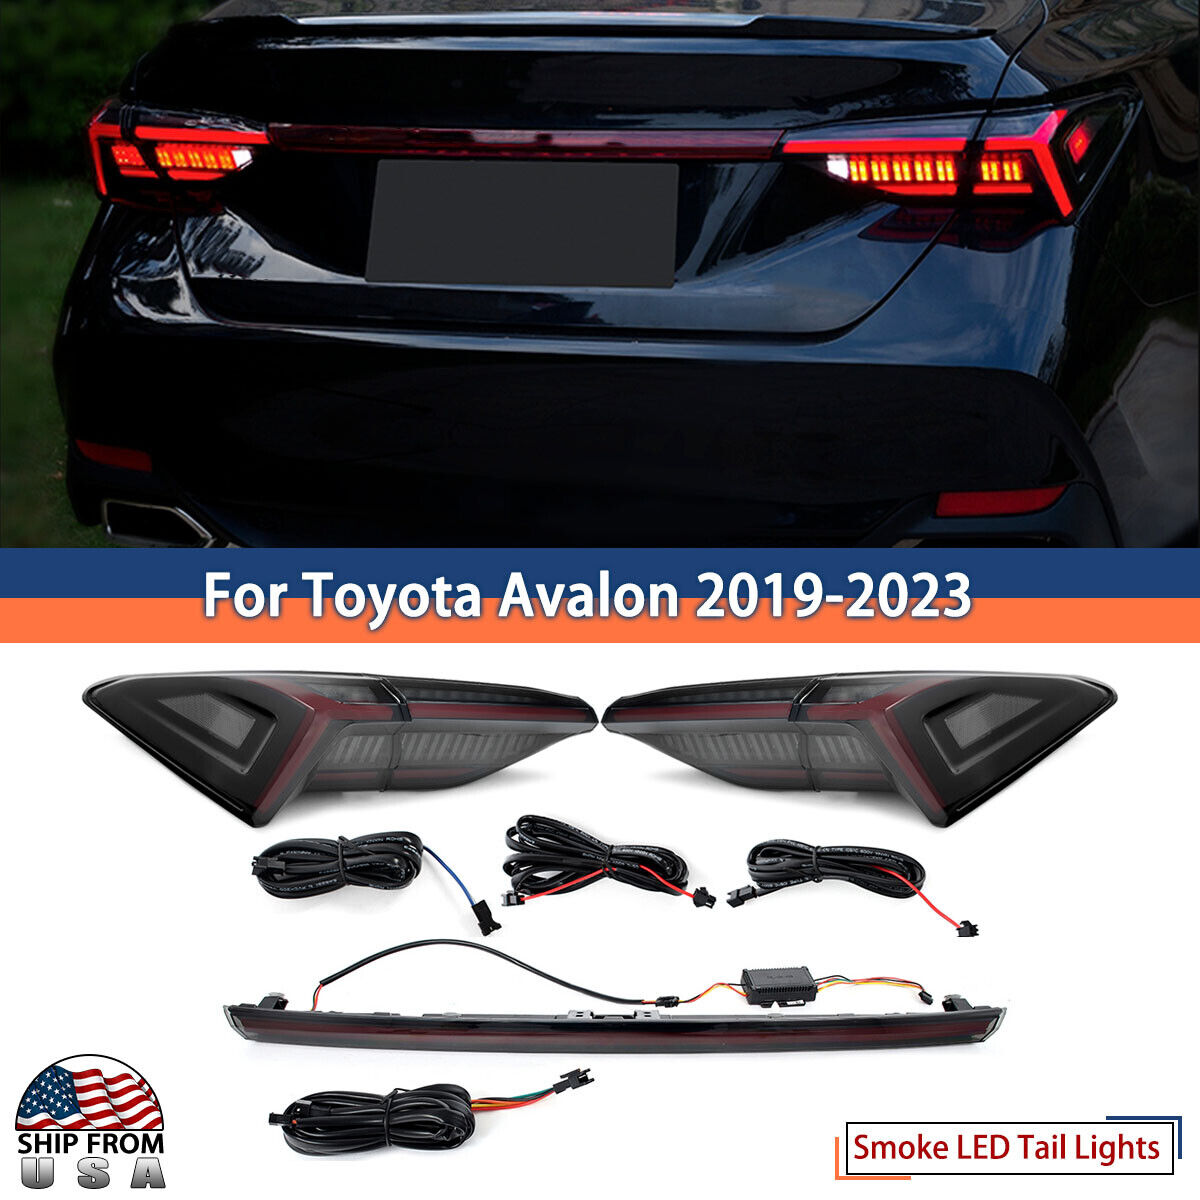 Smoke LED Tail Lights w/ Trunk For Toyota Avalon 2019-2023 Rear Lamps Assembly